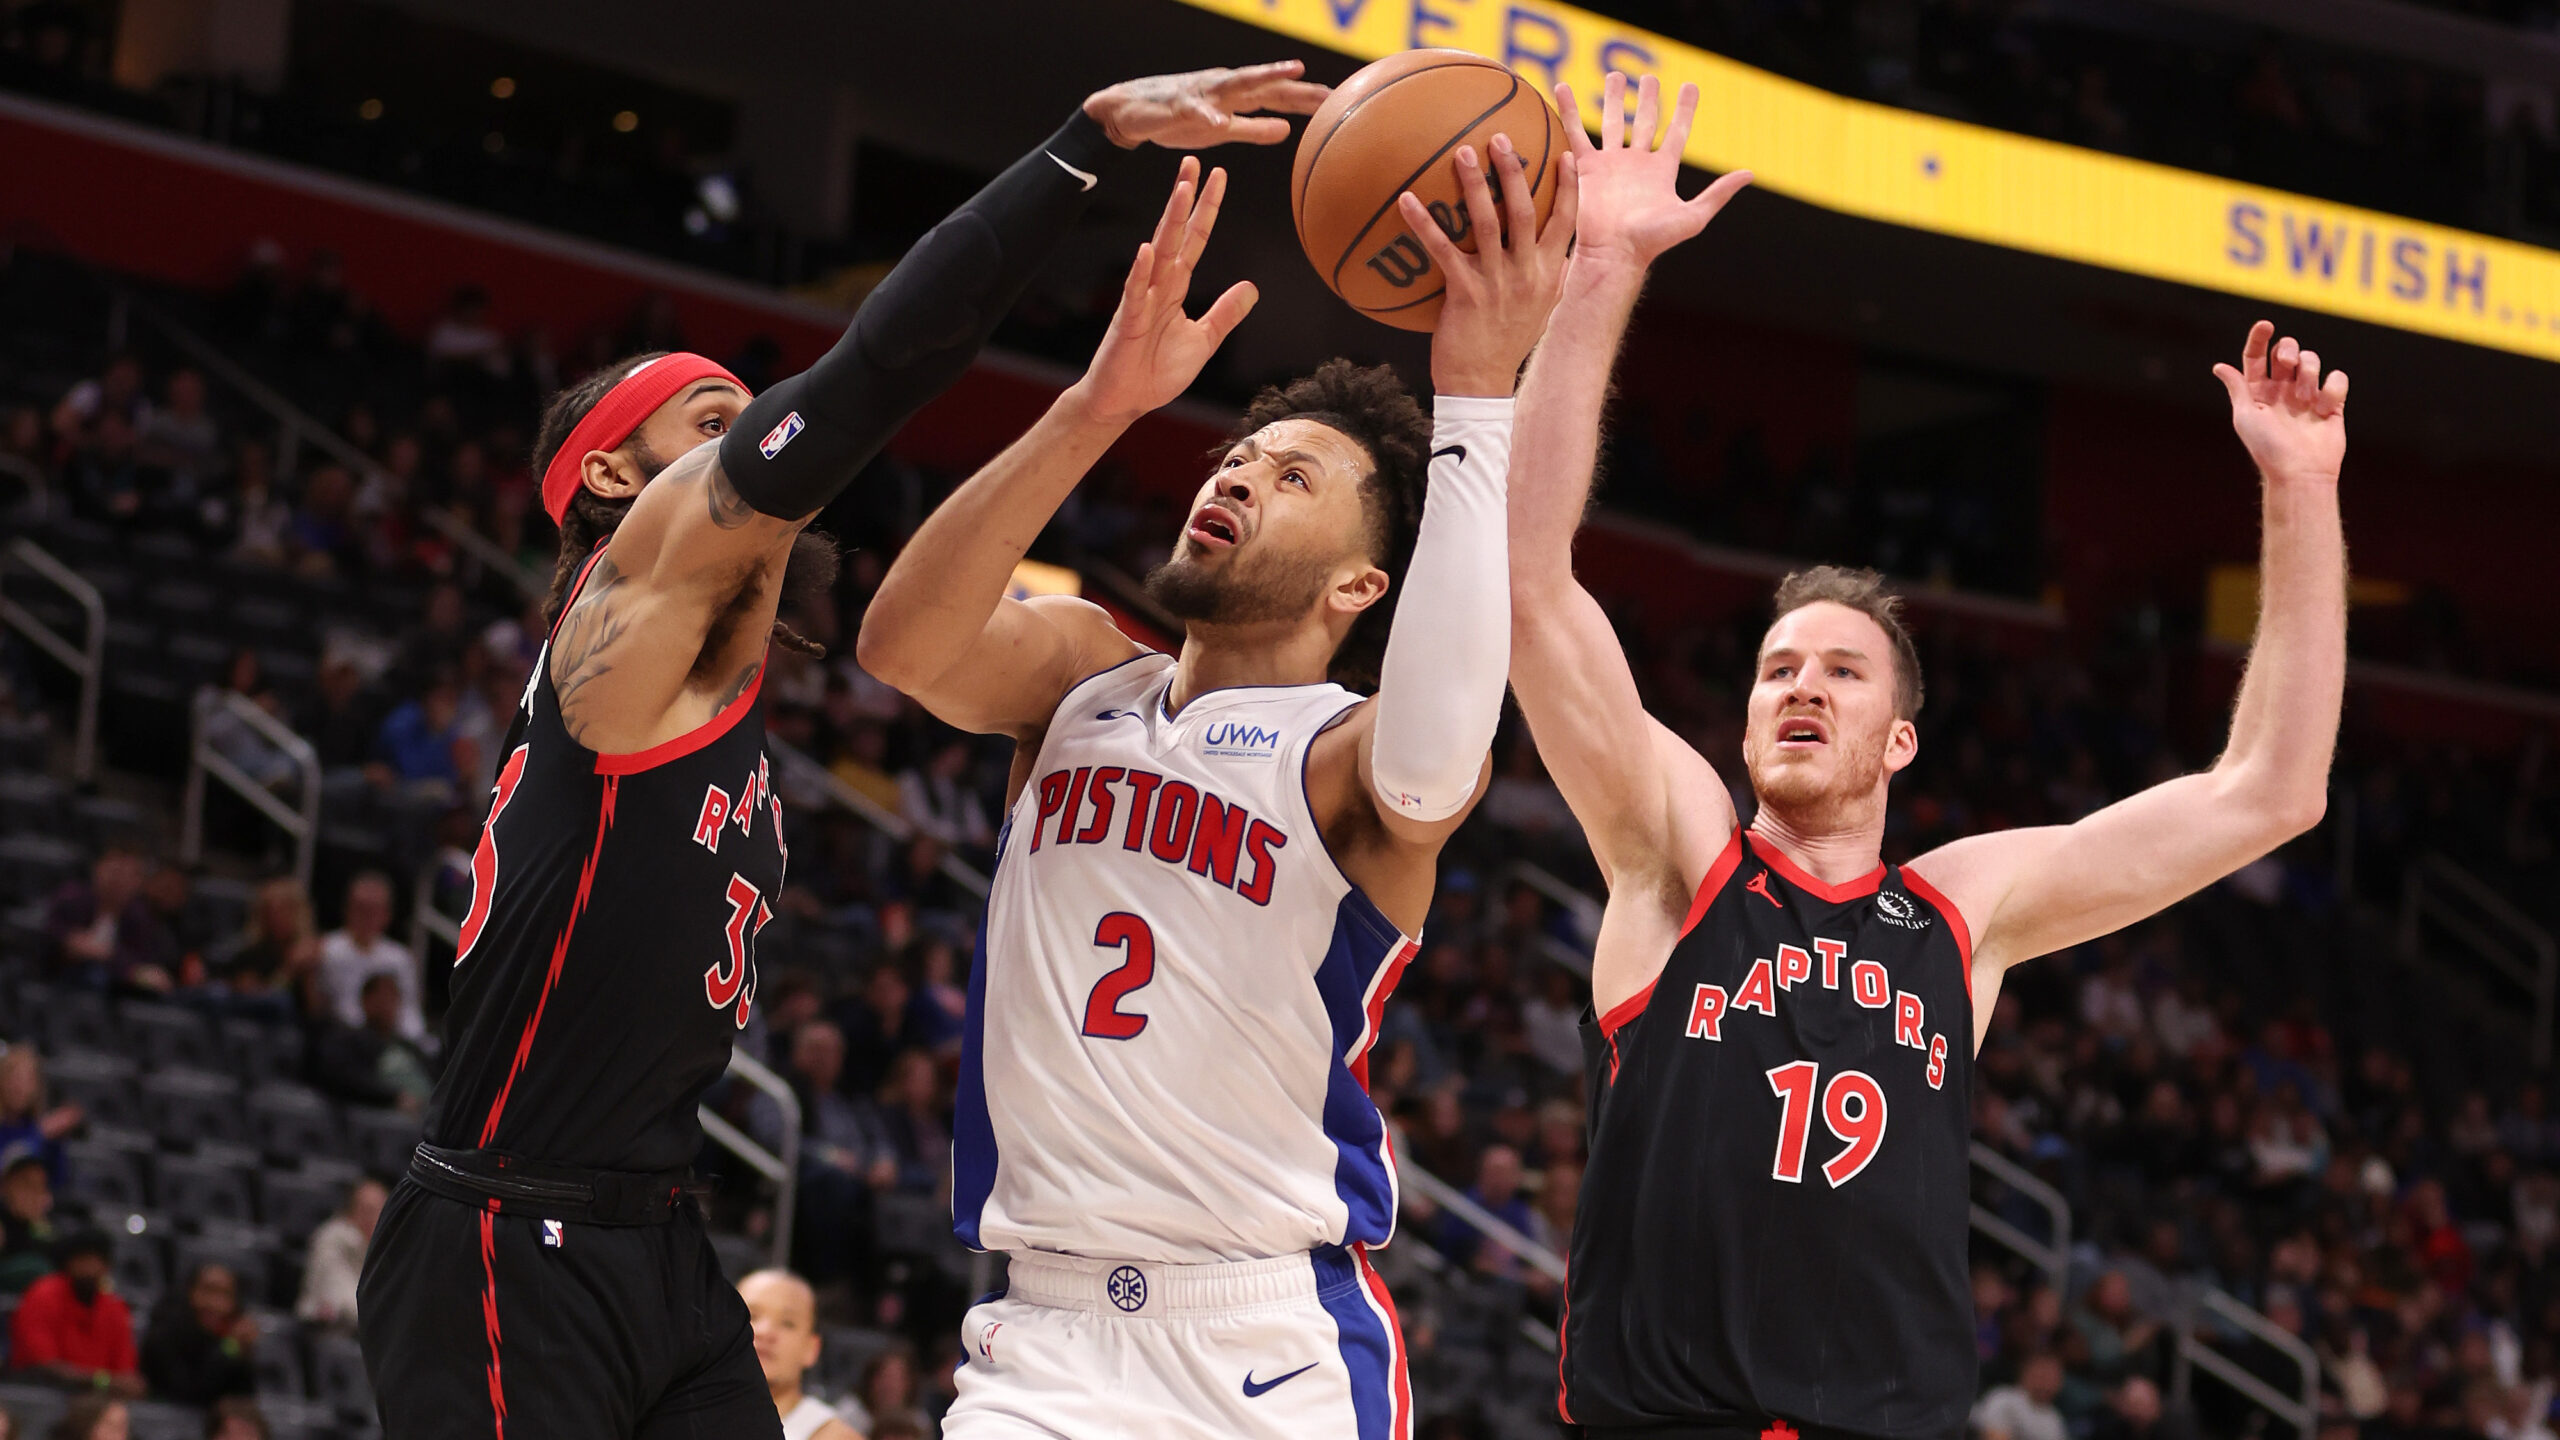 Detroit Pistons end a historic losing streak with a win against the Toronto Raptors